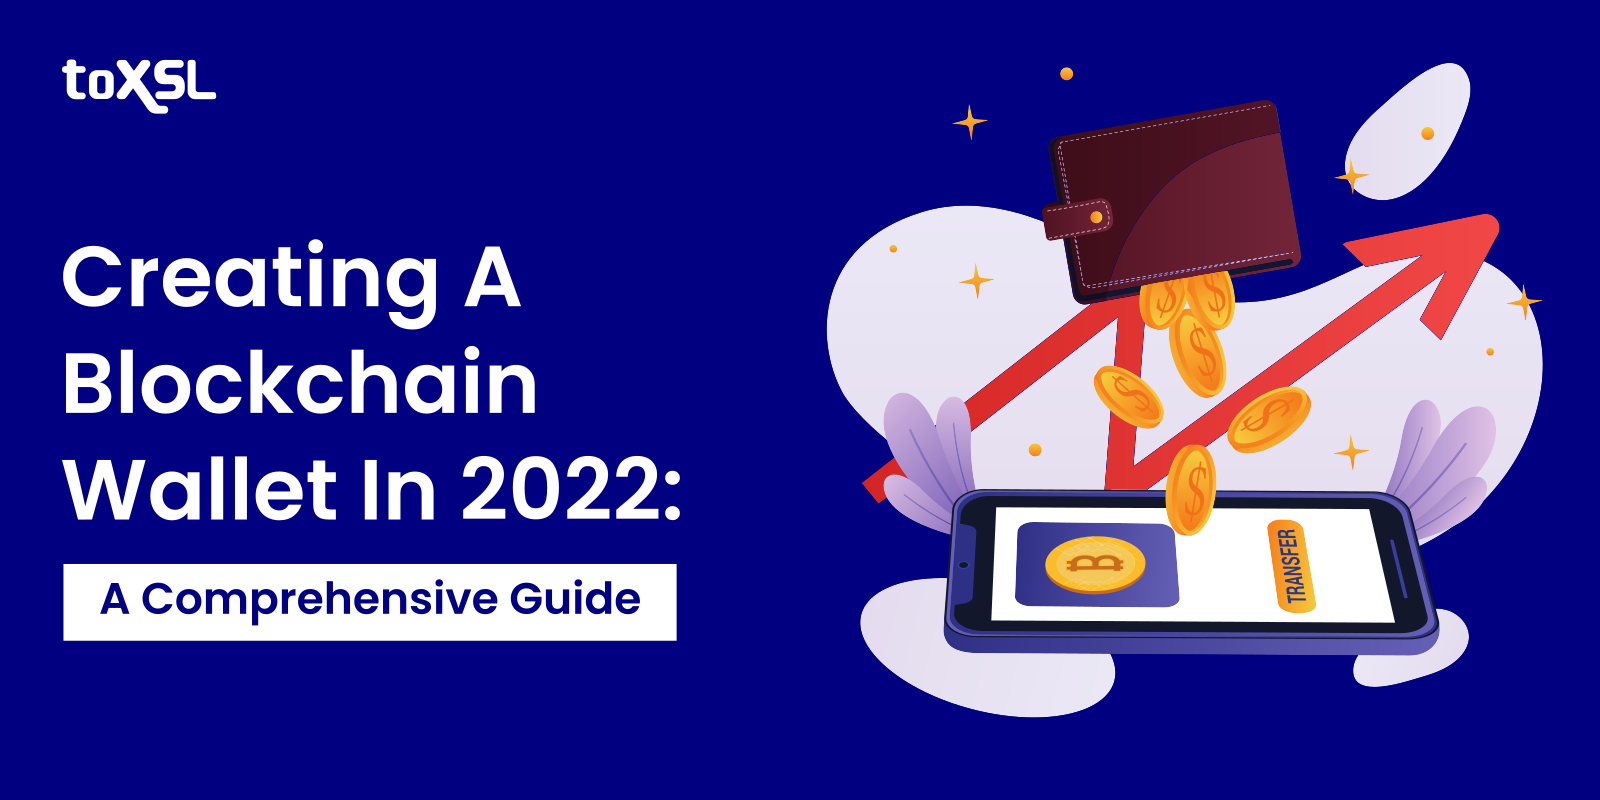 Creating A Blockchain Wallet In 2022: A Comprehensive Guide